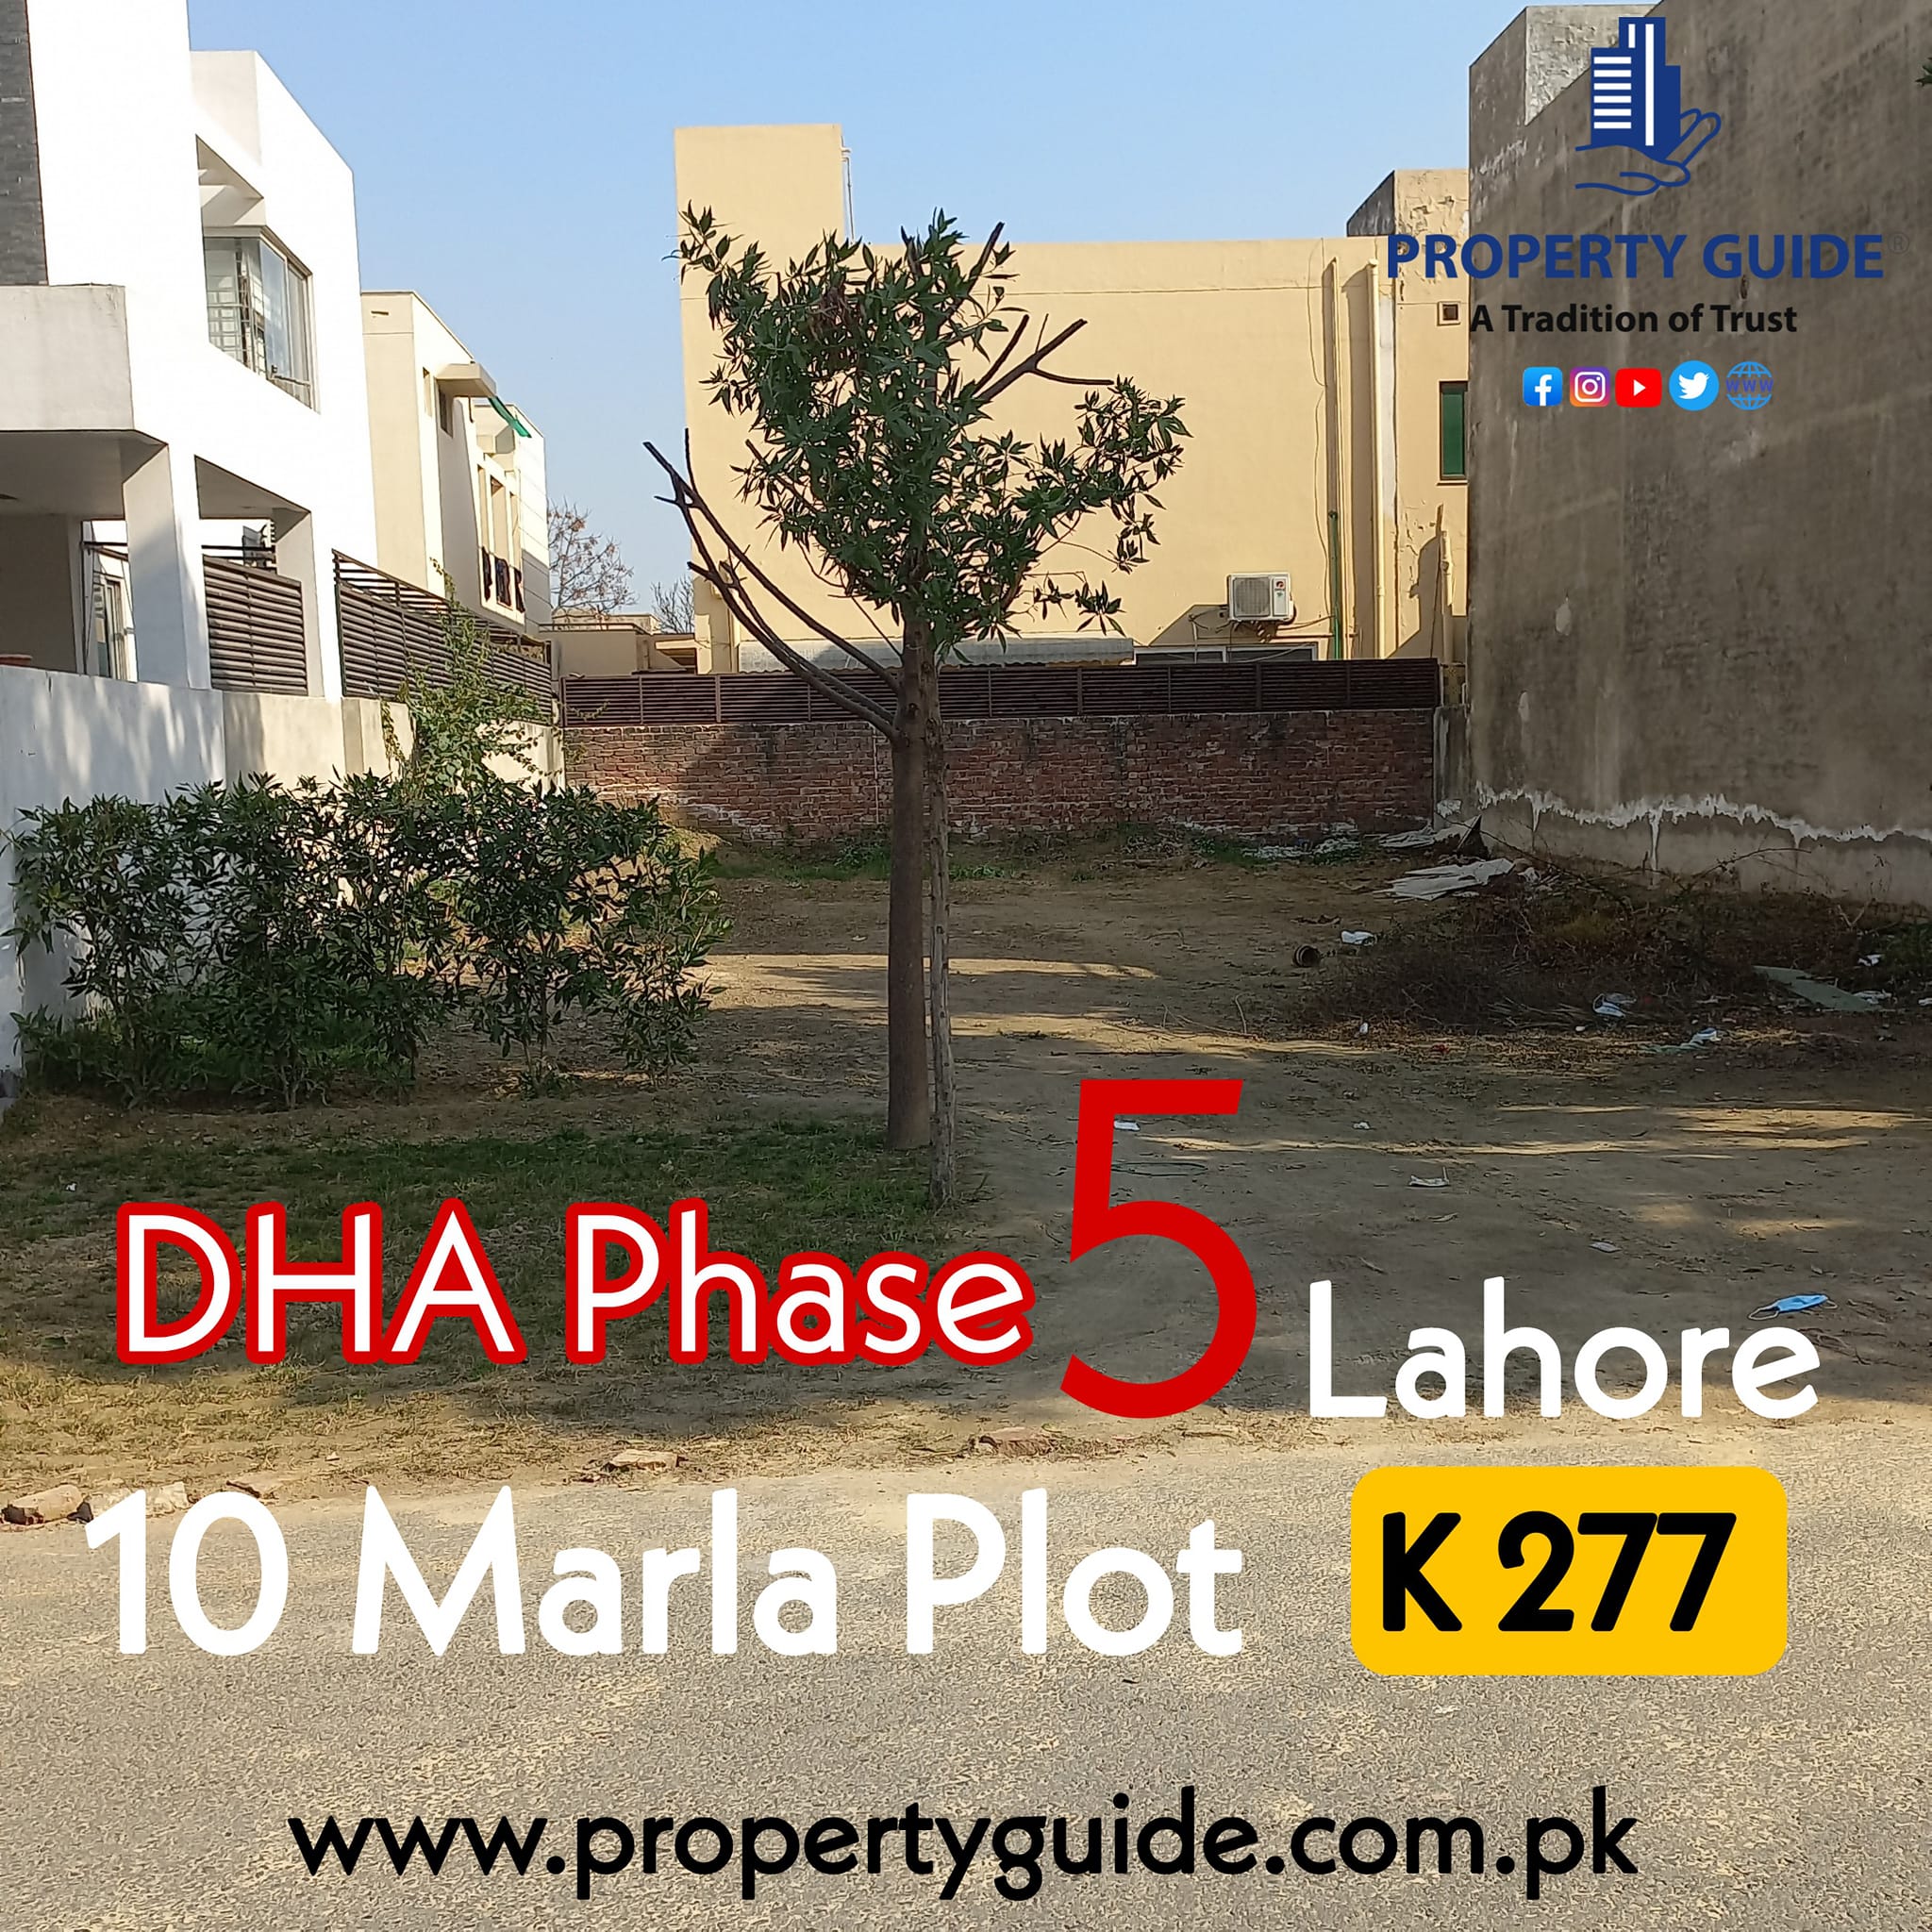 10 Marla Plot For Sale In DHA Phase 5 Lahore K 277